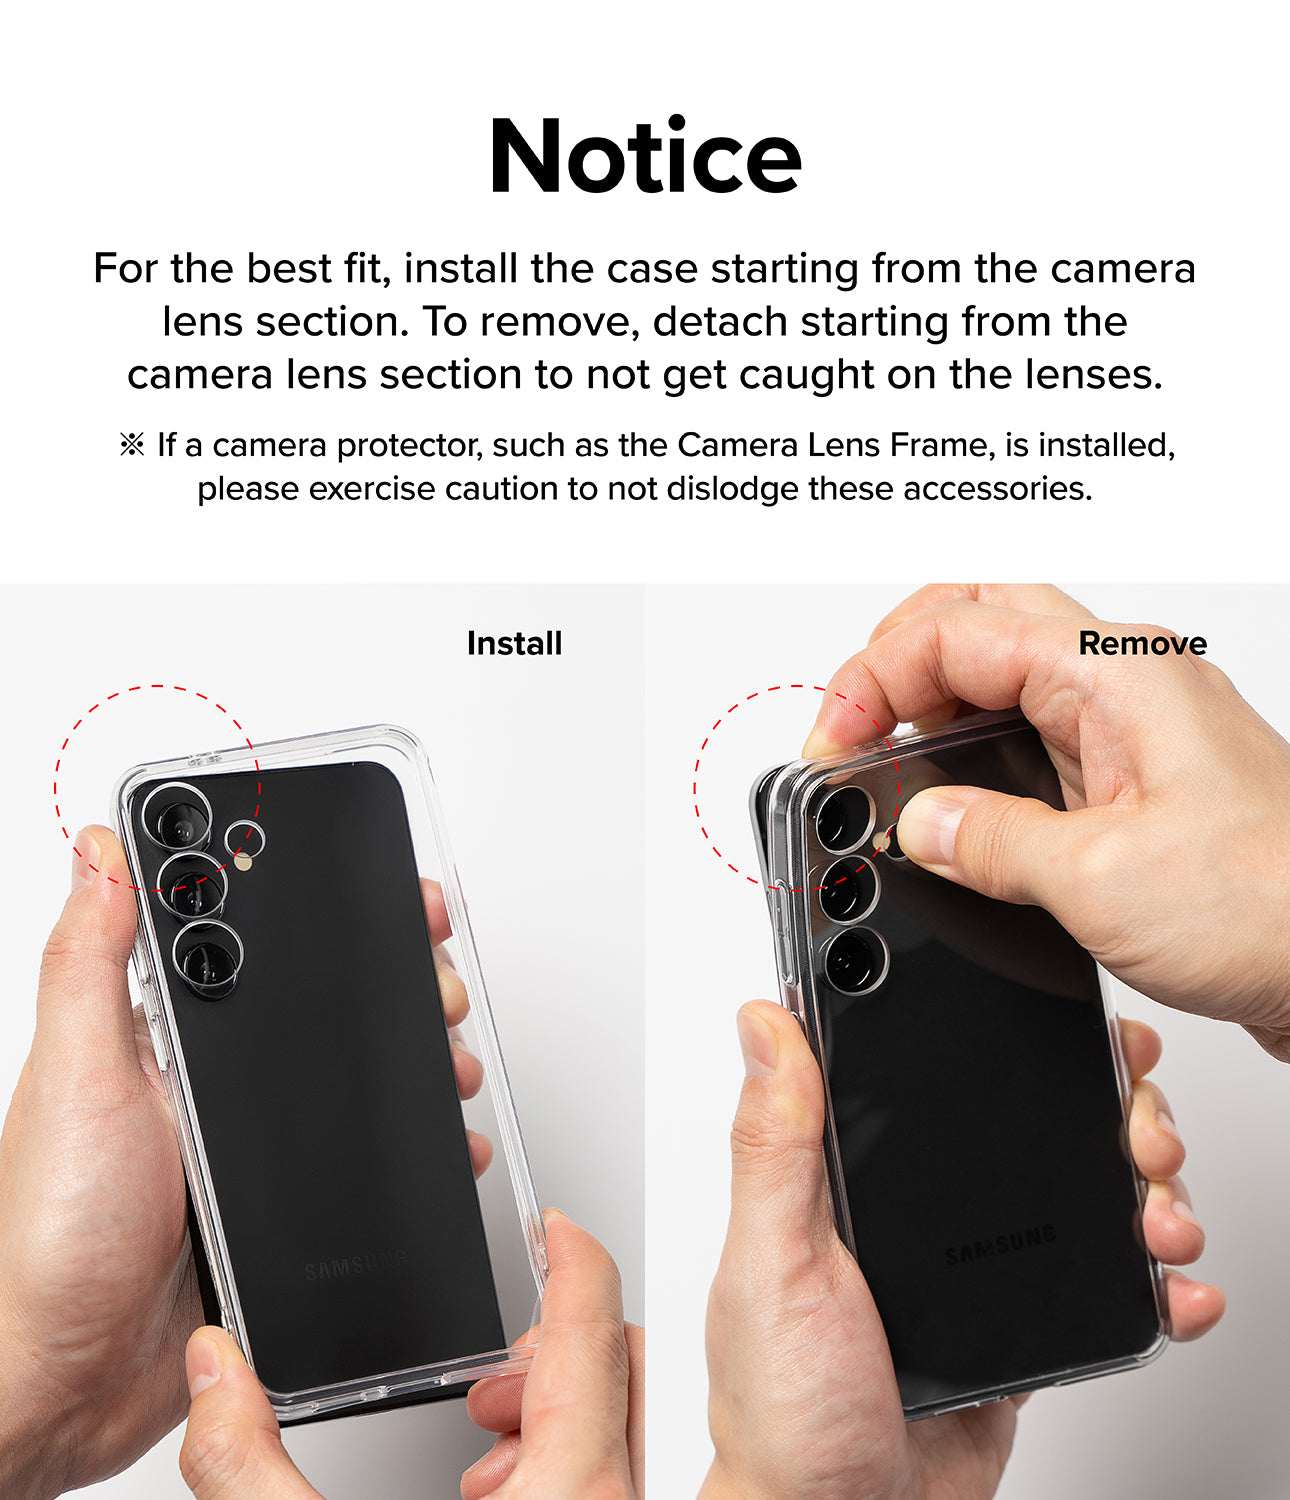 Galaxy S24 Case | Fusion Design - Notice. For the best fit, install the case starting from the camera lens section. To remove, detach starting from the camera lens section to not get caught on the lenses.